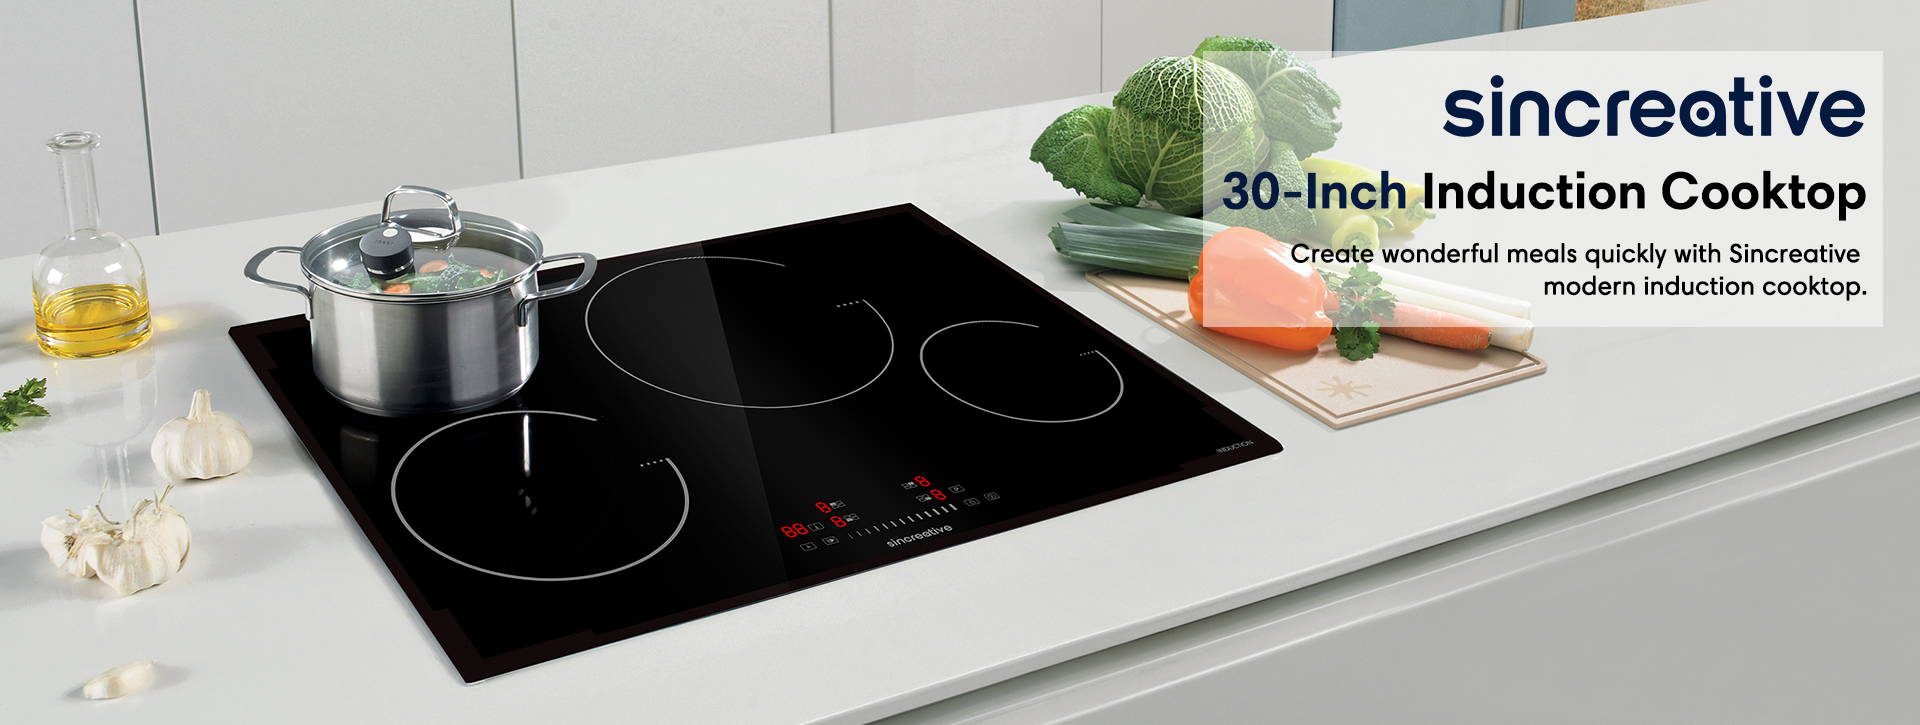 Sincreative 30 inch induction cooktop Create wonderful meals quicklu with Sincreative modern indution cooktop